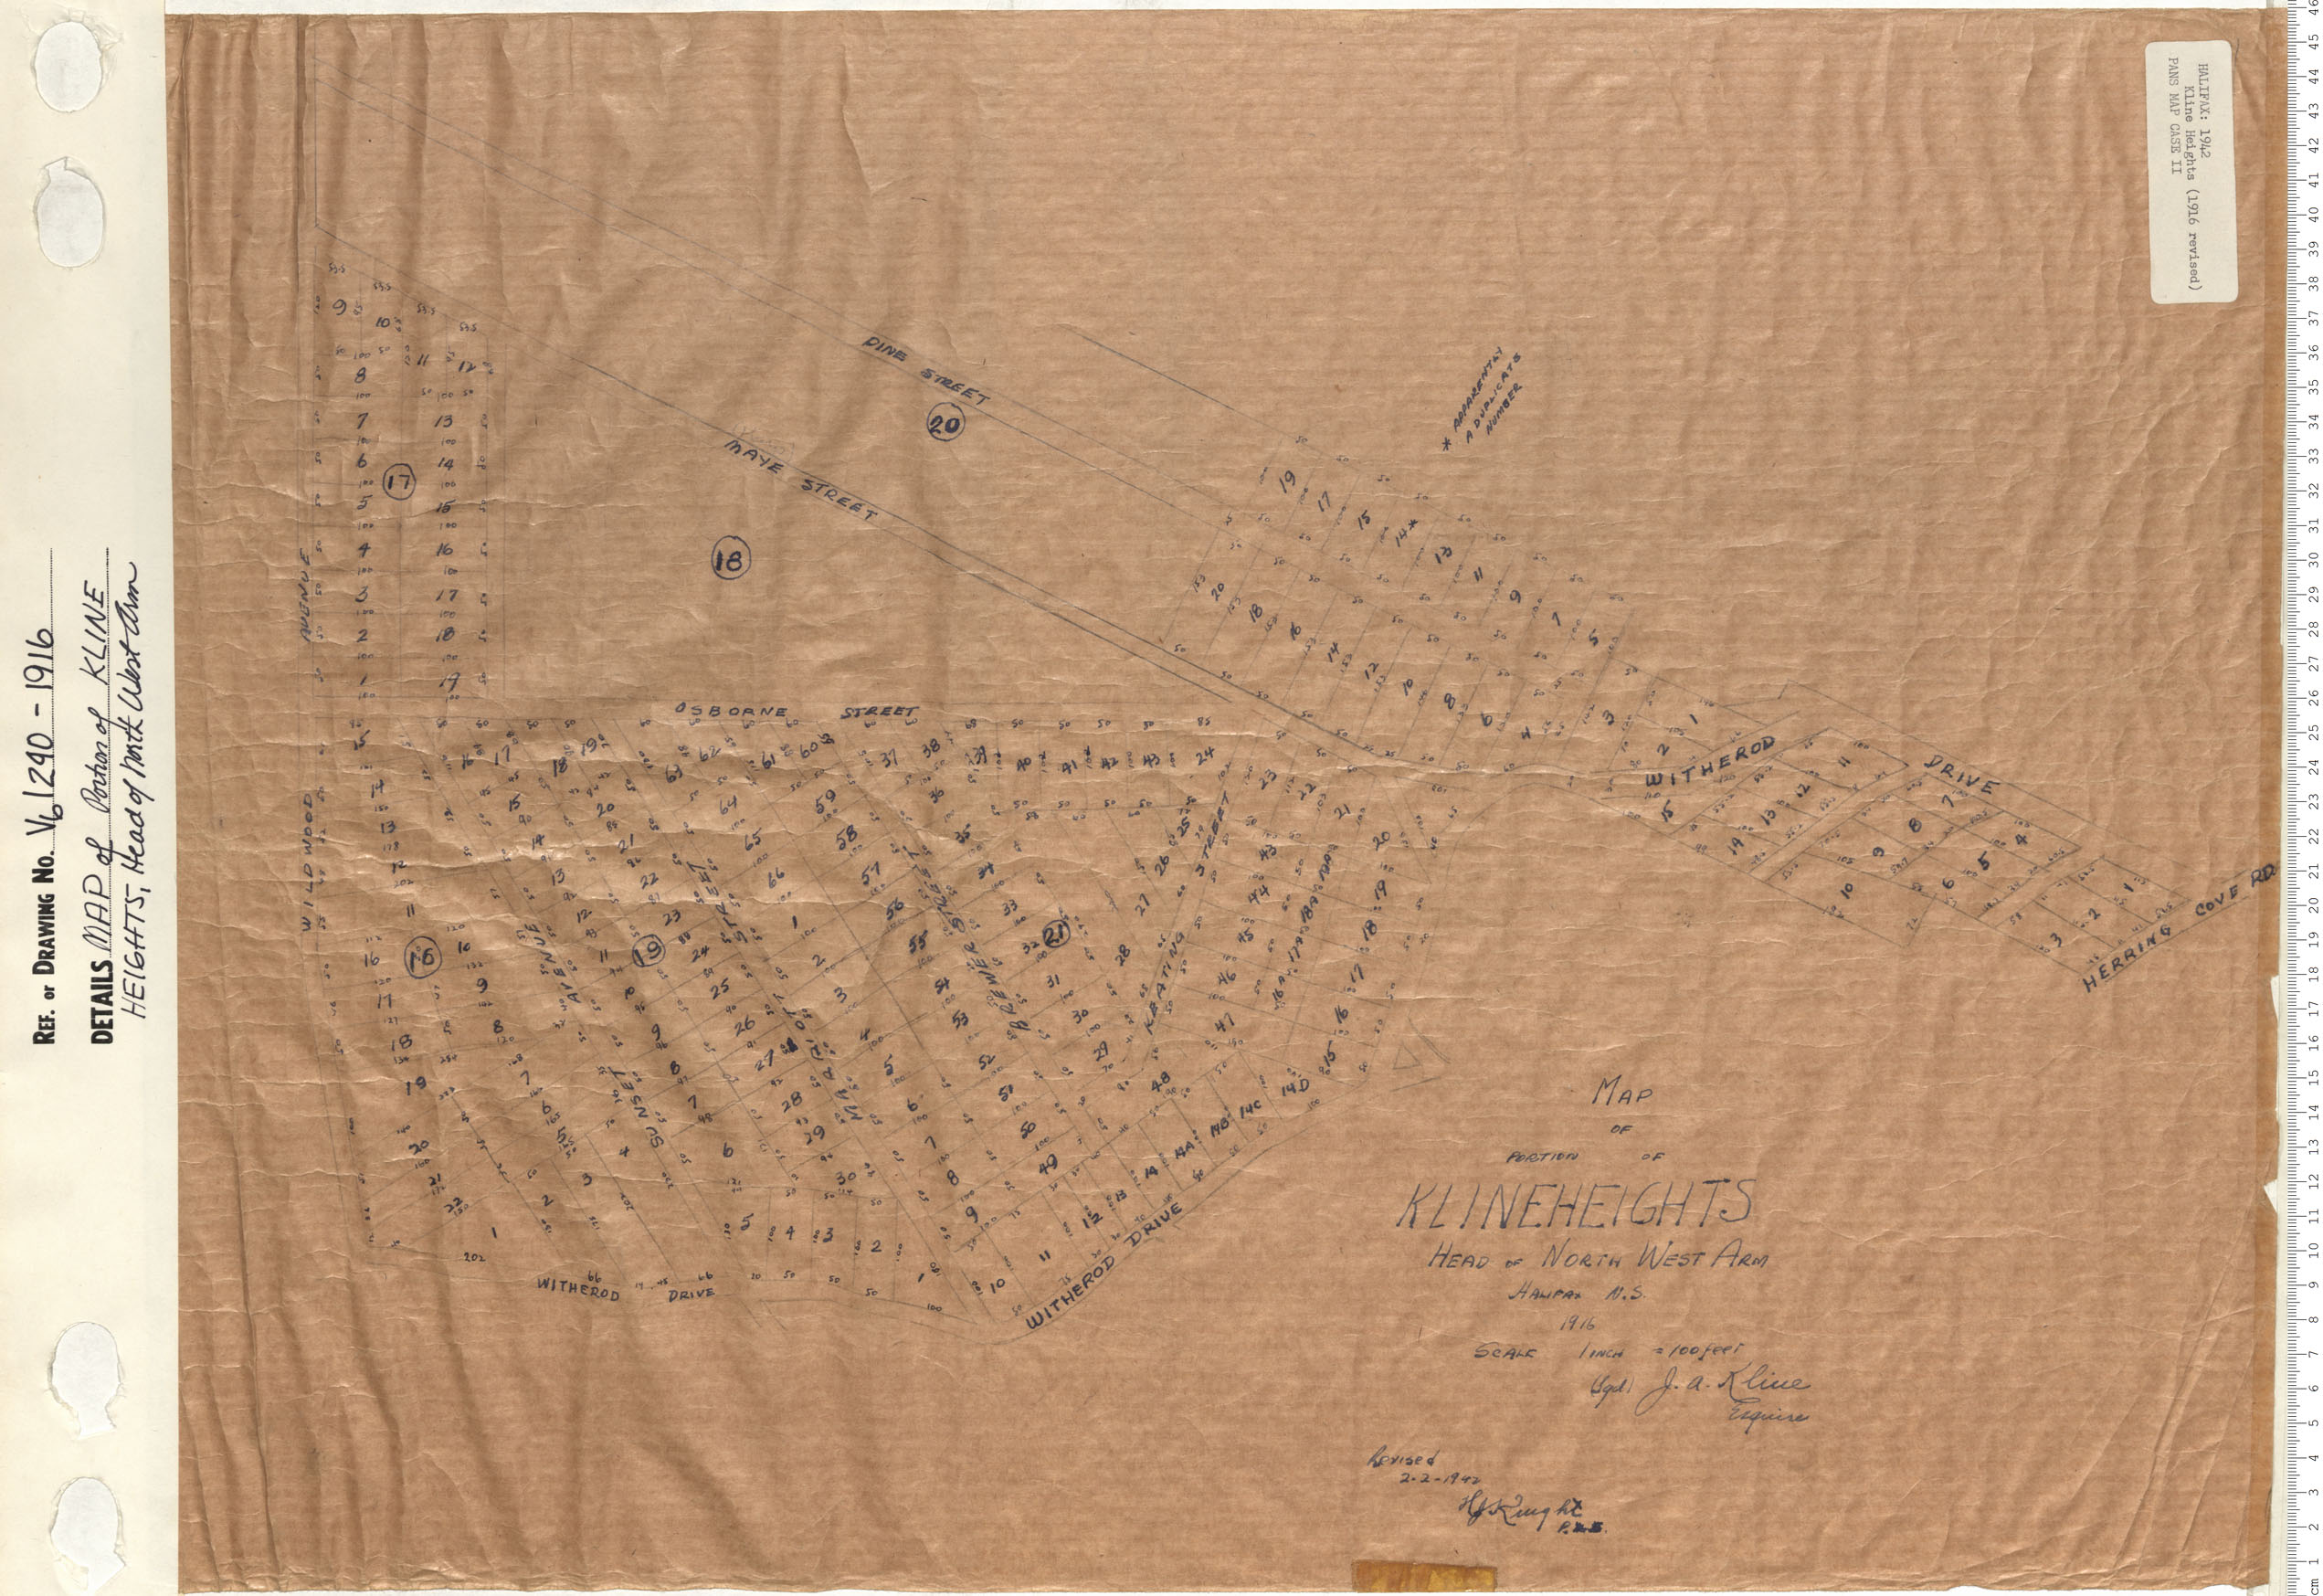 MAP of the Portion of KLINE HEIGHTS Head of North West Arm